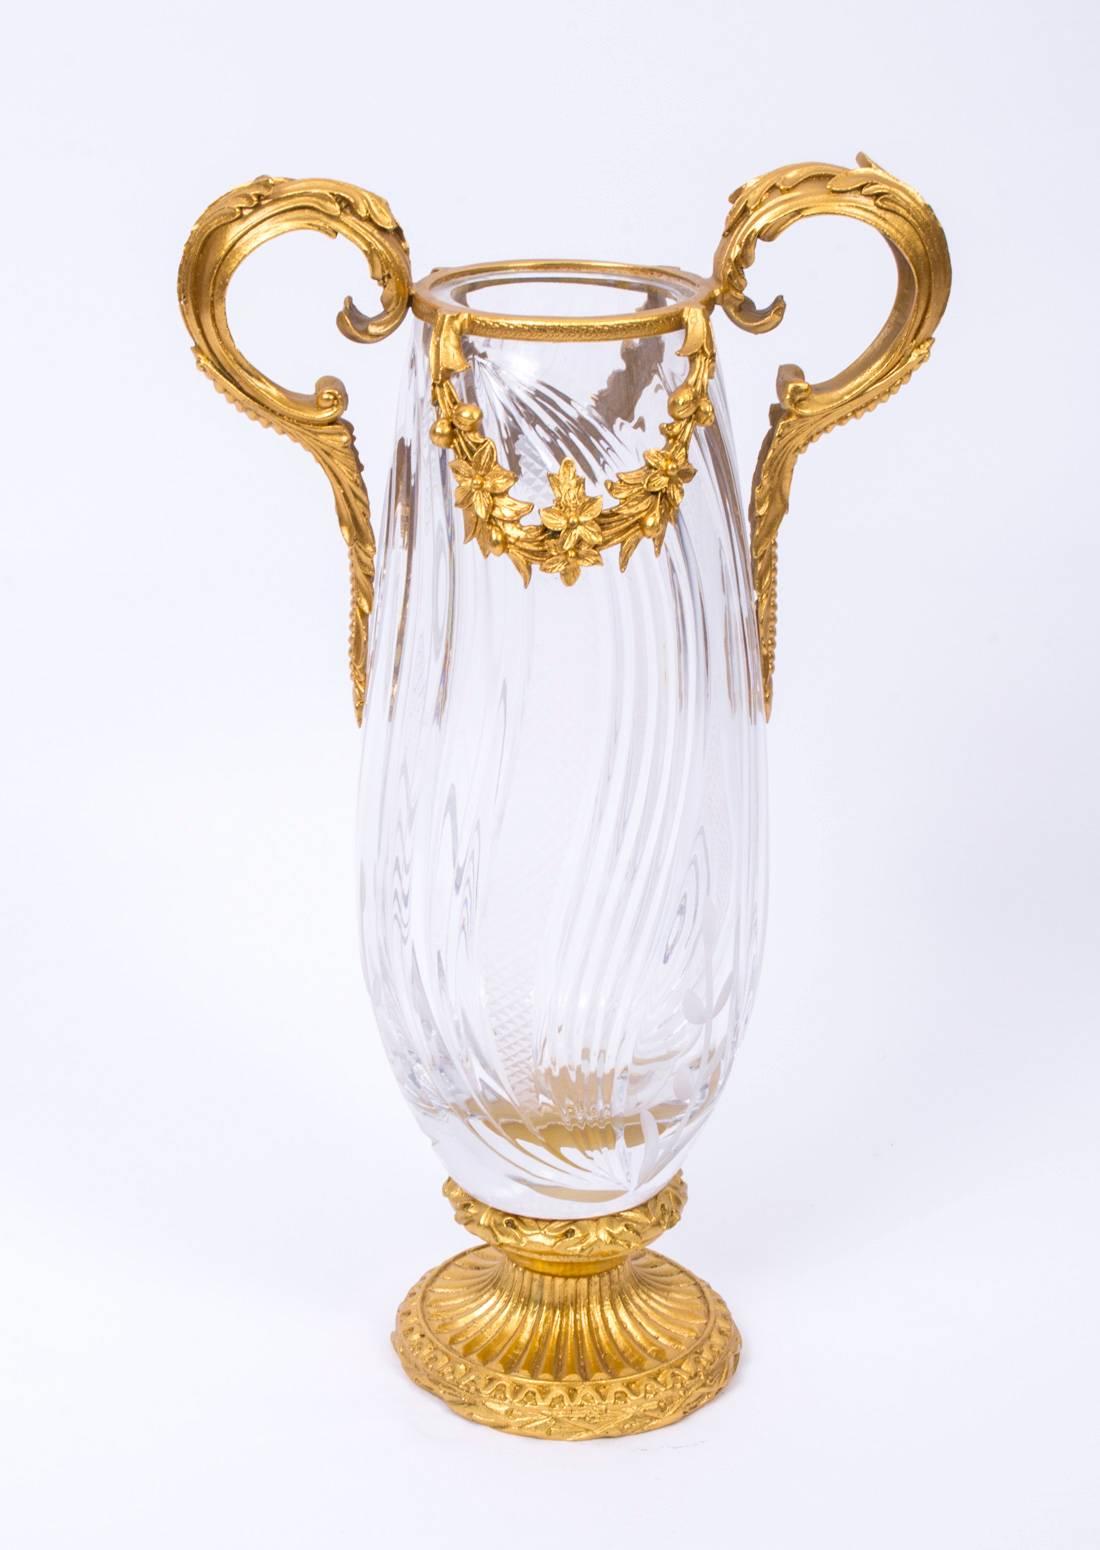 A remarkable pair of French ormolu-mounted and cut crystal vases dating from the last quarter of the 20th century.

These magnificent vases feature cut glass leaf contour scrolls and faceted diamond patterned details. The ormolu-mounted handles